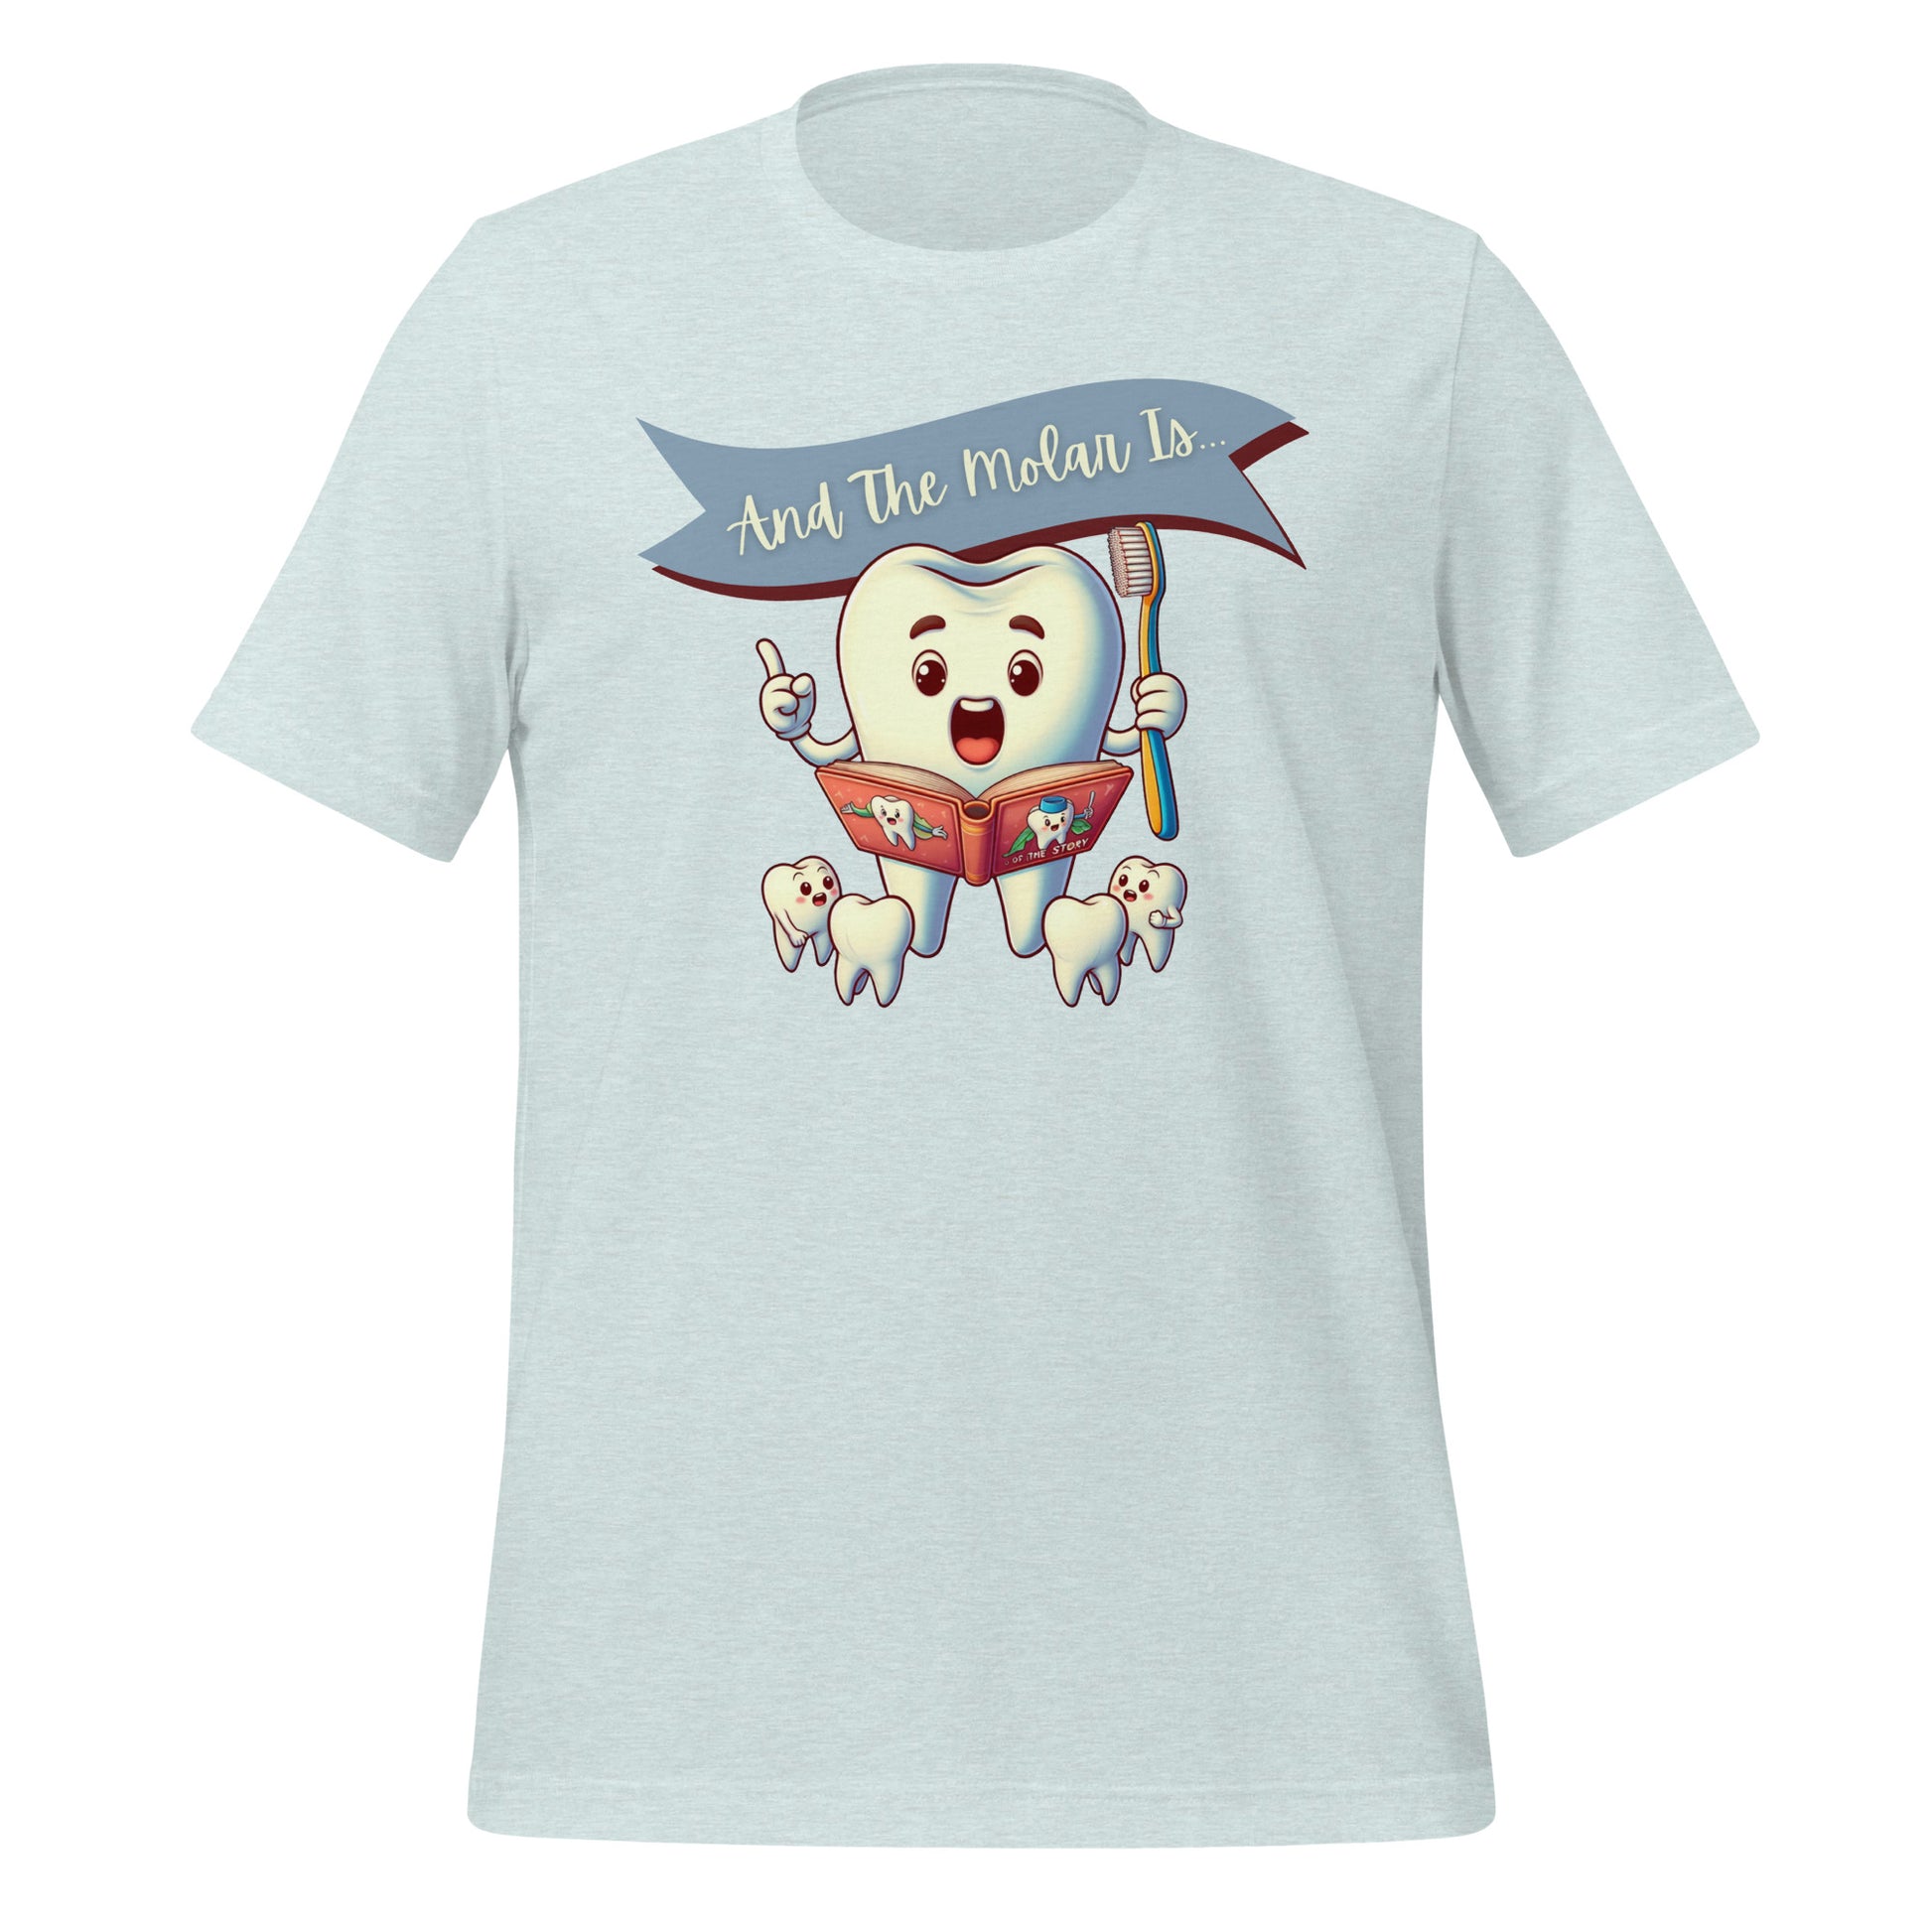 Cute dental shirt featuring a smiling tooth character reading a book with the caption ‘And The Molar Is,’ surrounded by smaller tooth characters. Heather prism ice blue color.